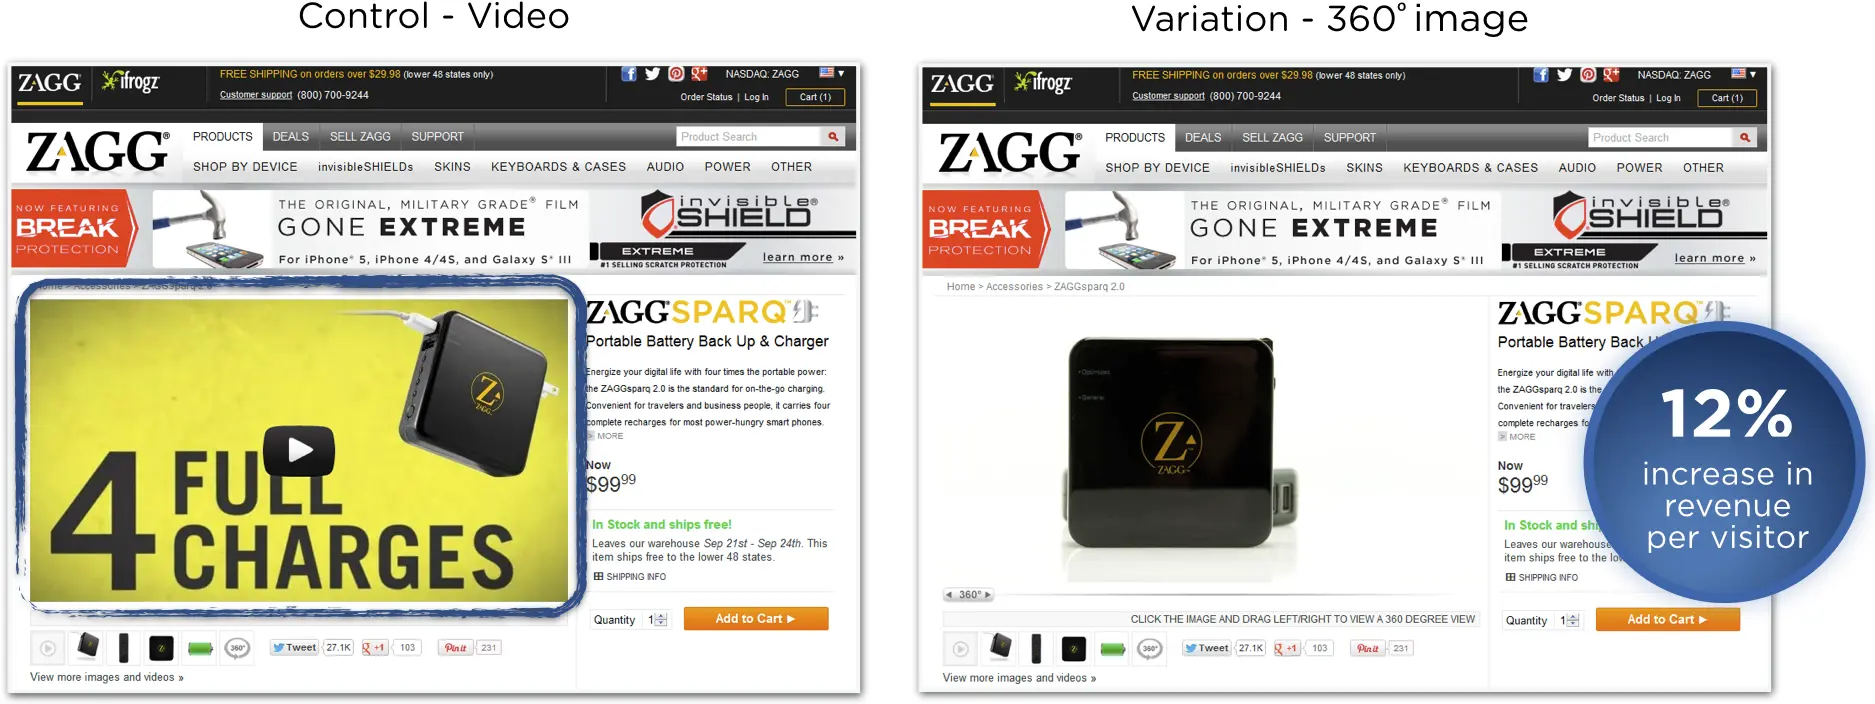 Product image test from ZAGG